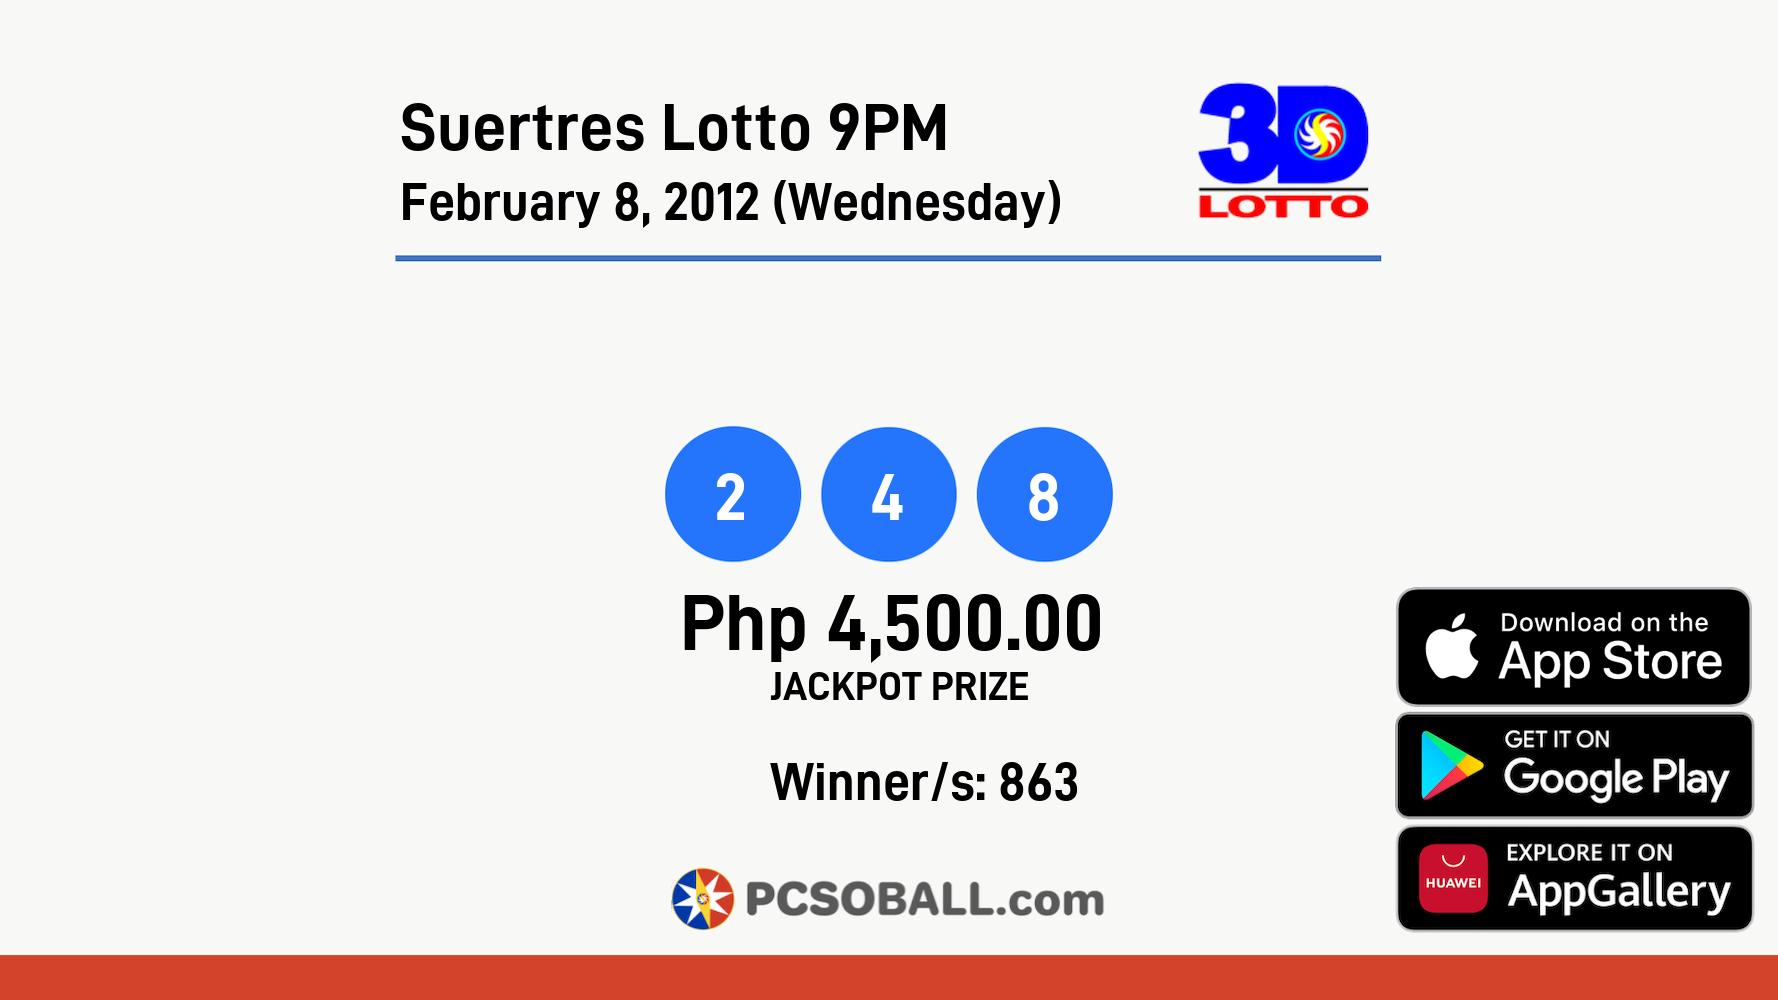 Suertres Lotto 9PM February 8, 2012 (Wednesday) Result